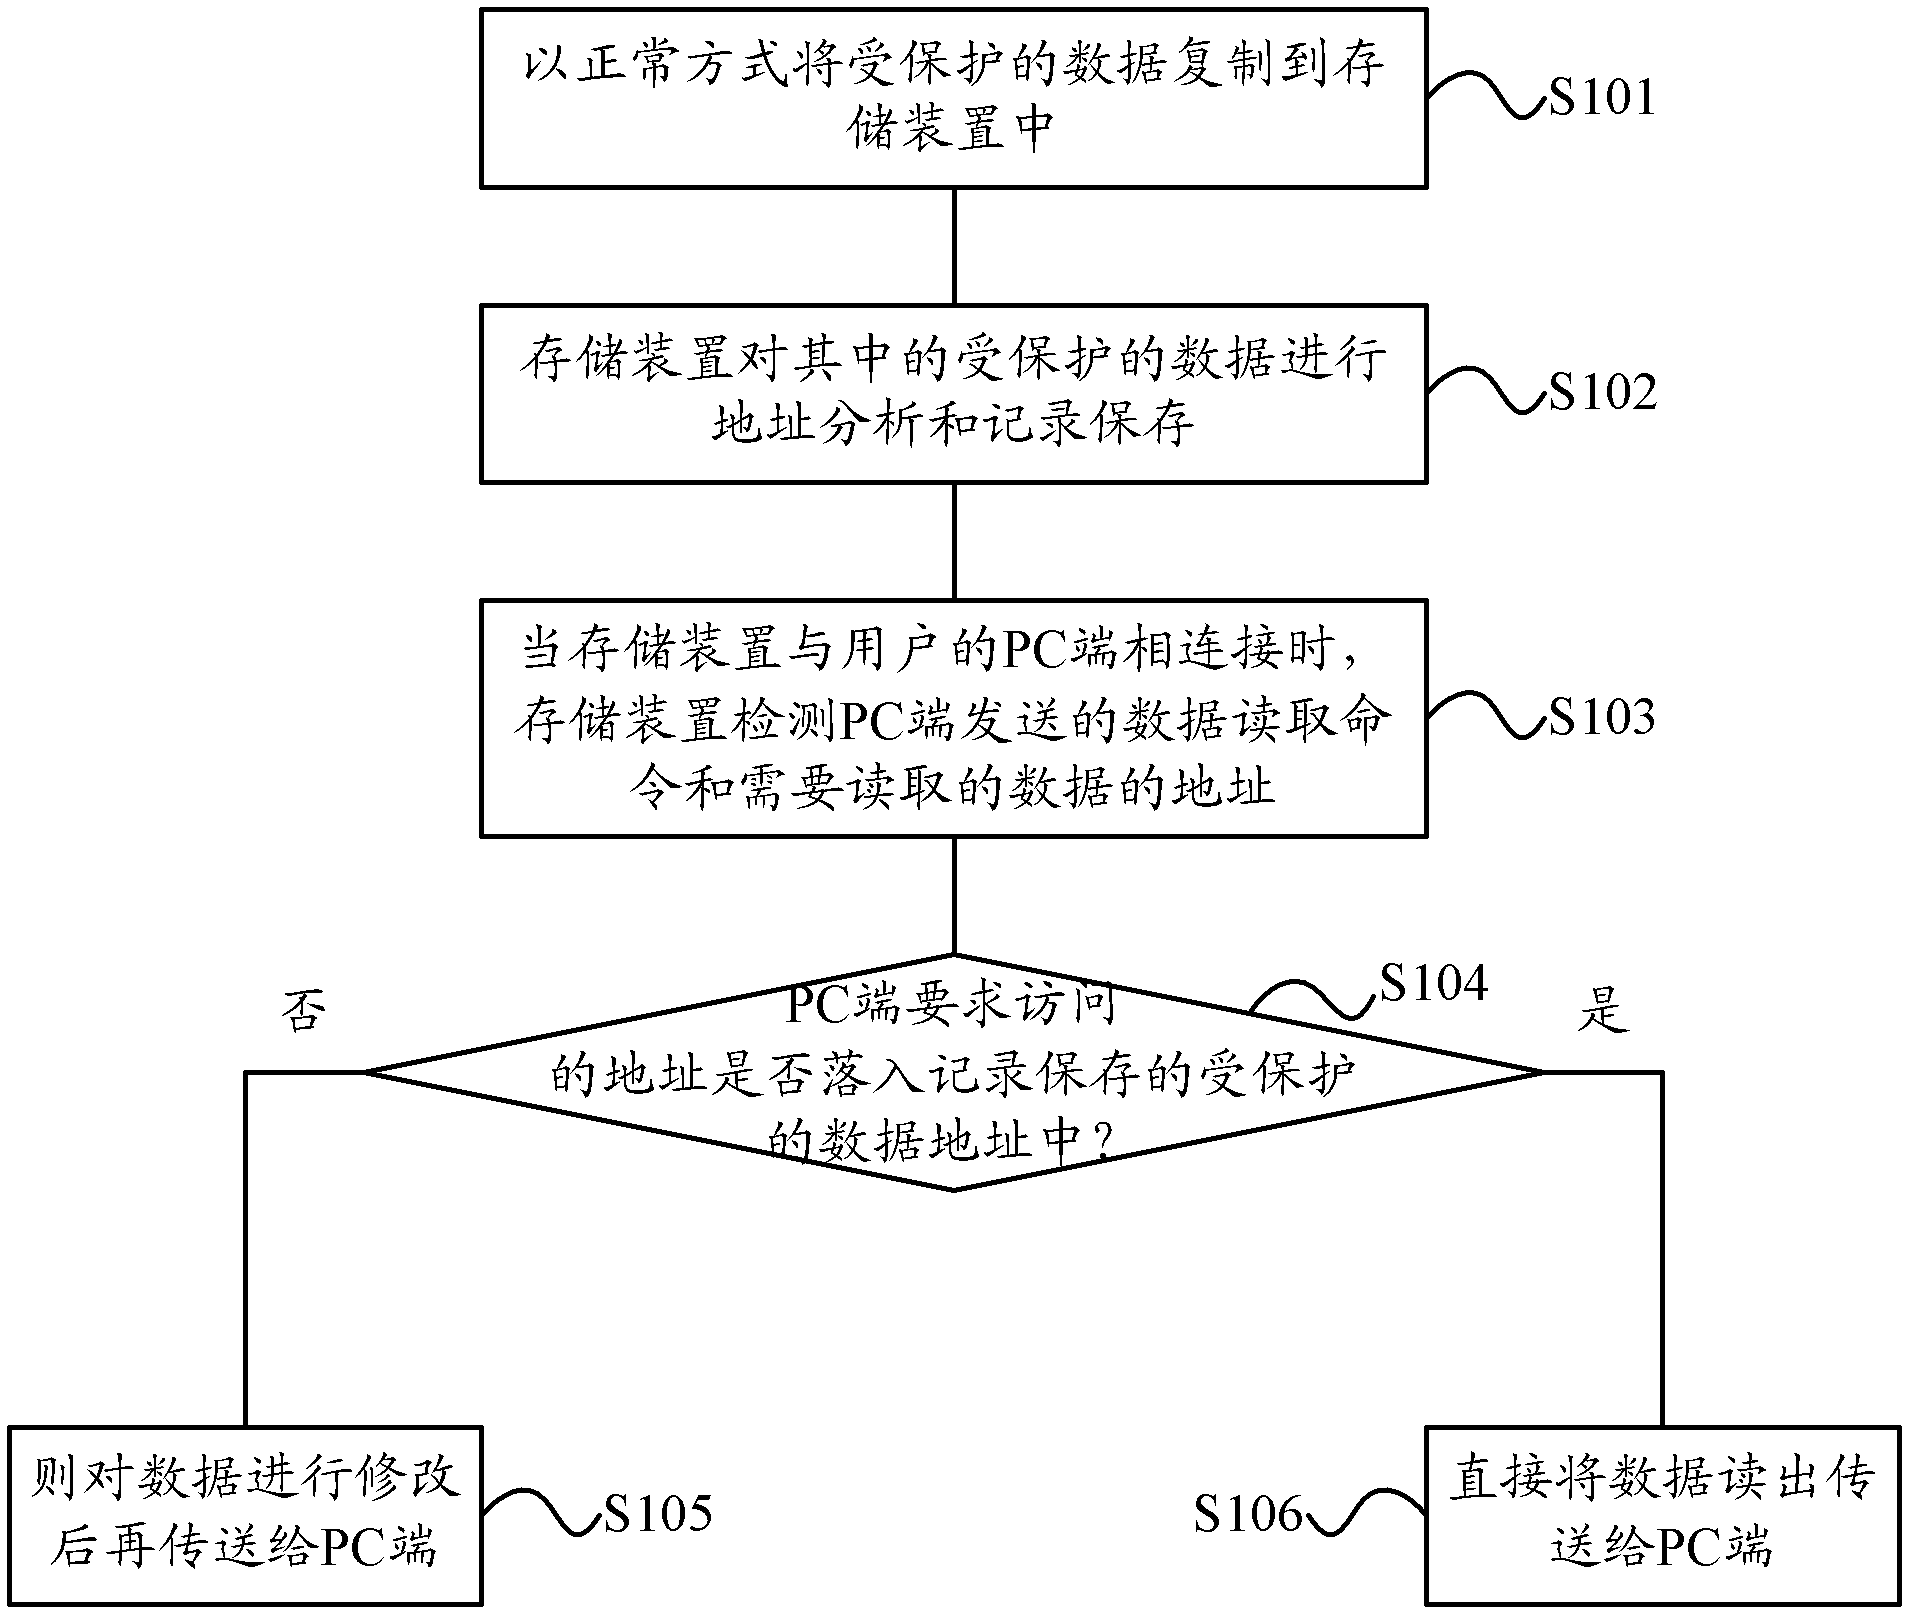 Method for limiting protected data in storing device from being copied to personal computer (PC) end